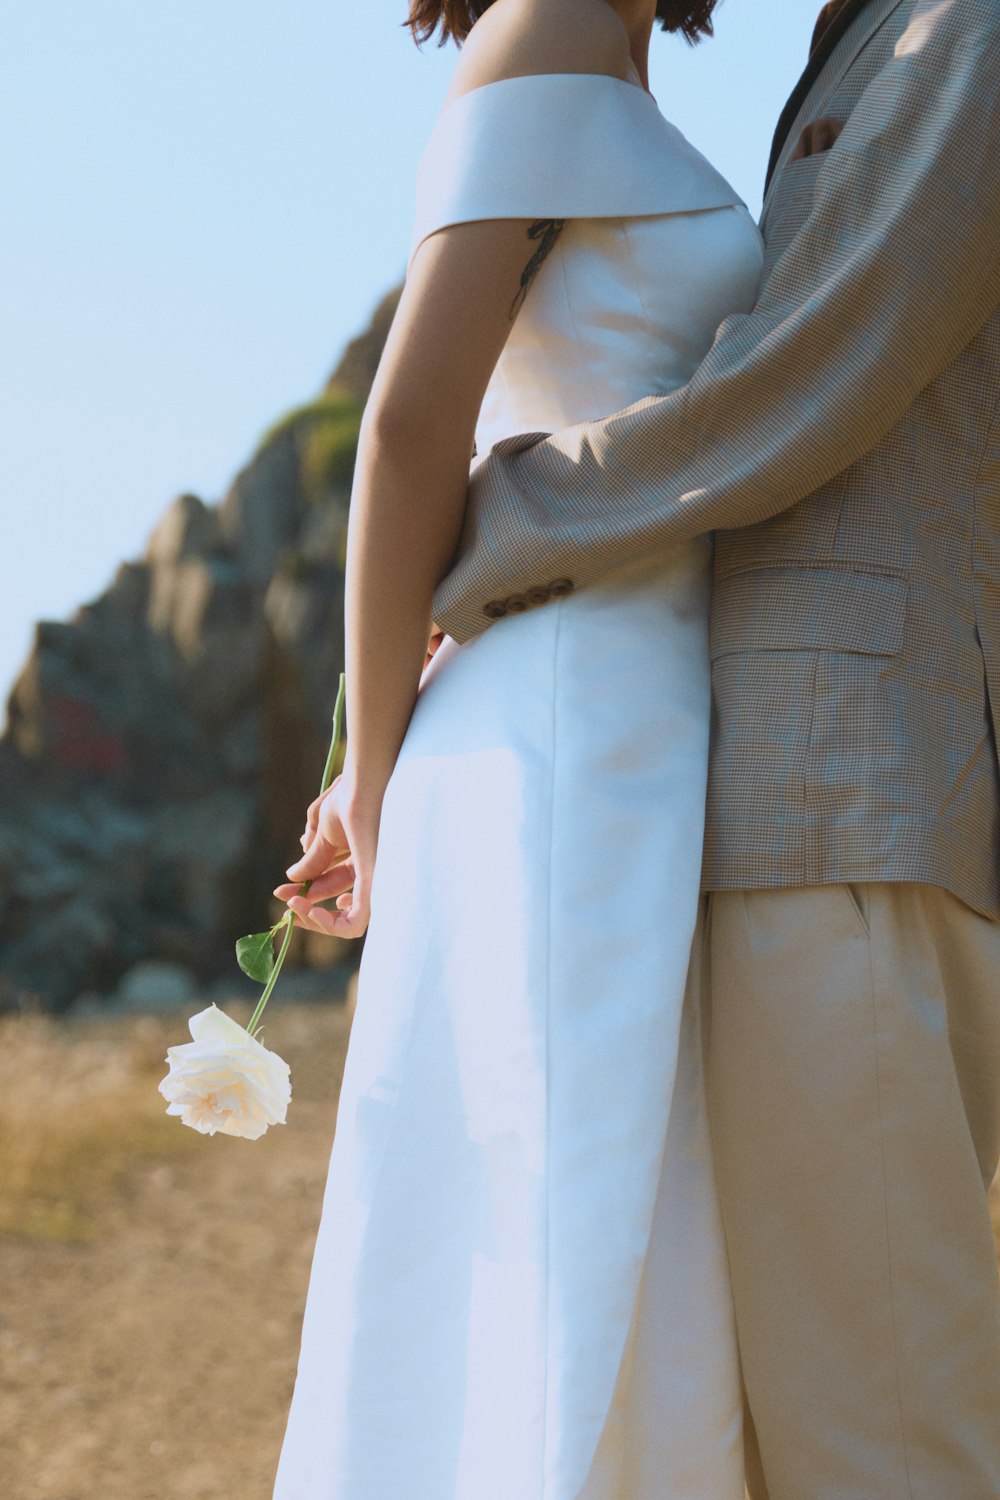 a person in a white dress holding a white flower